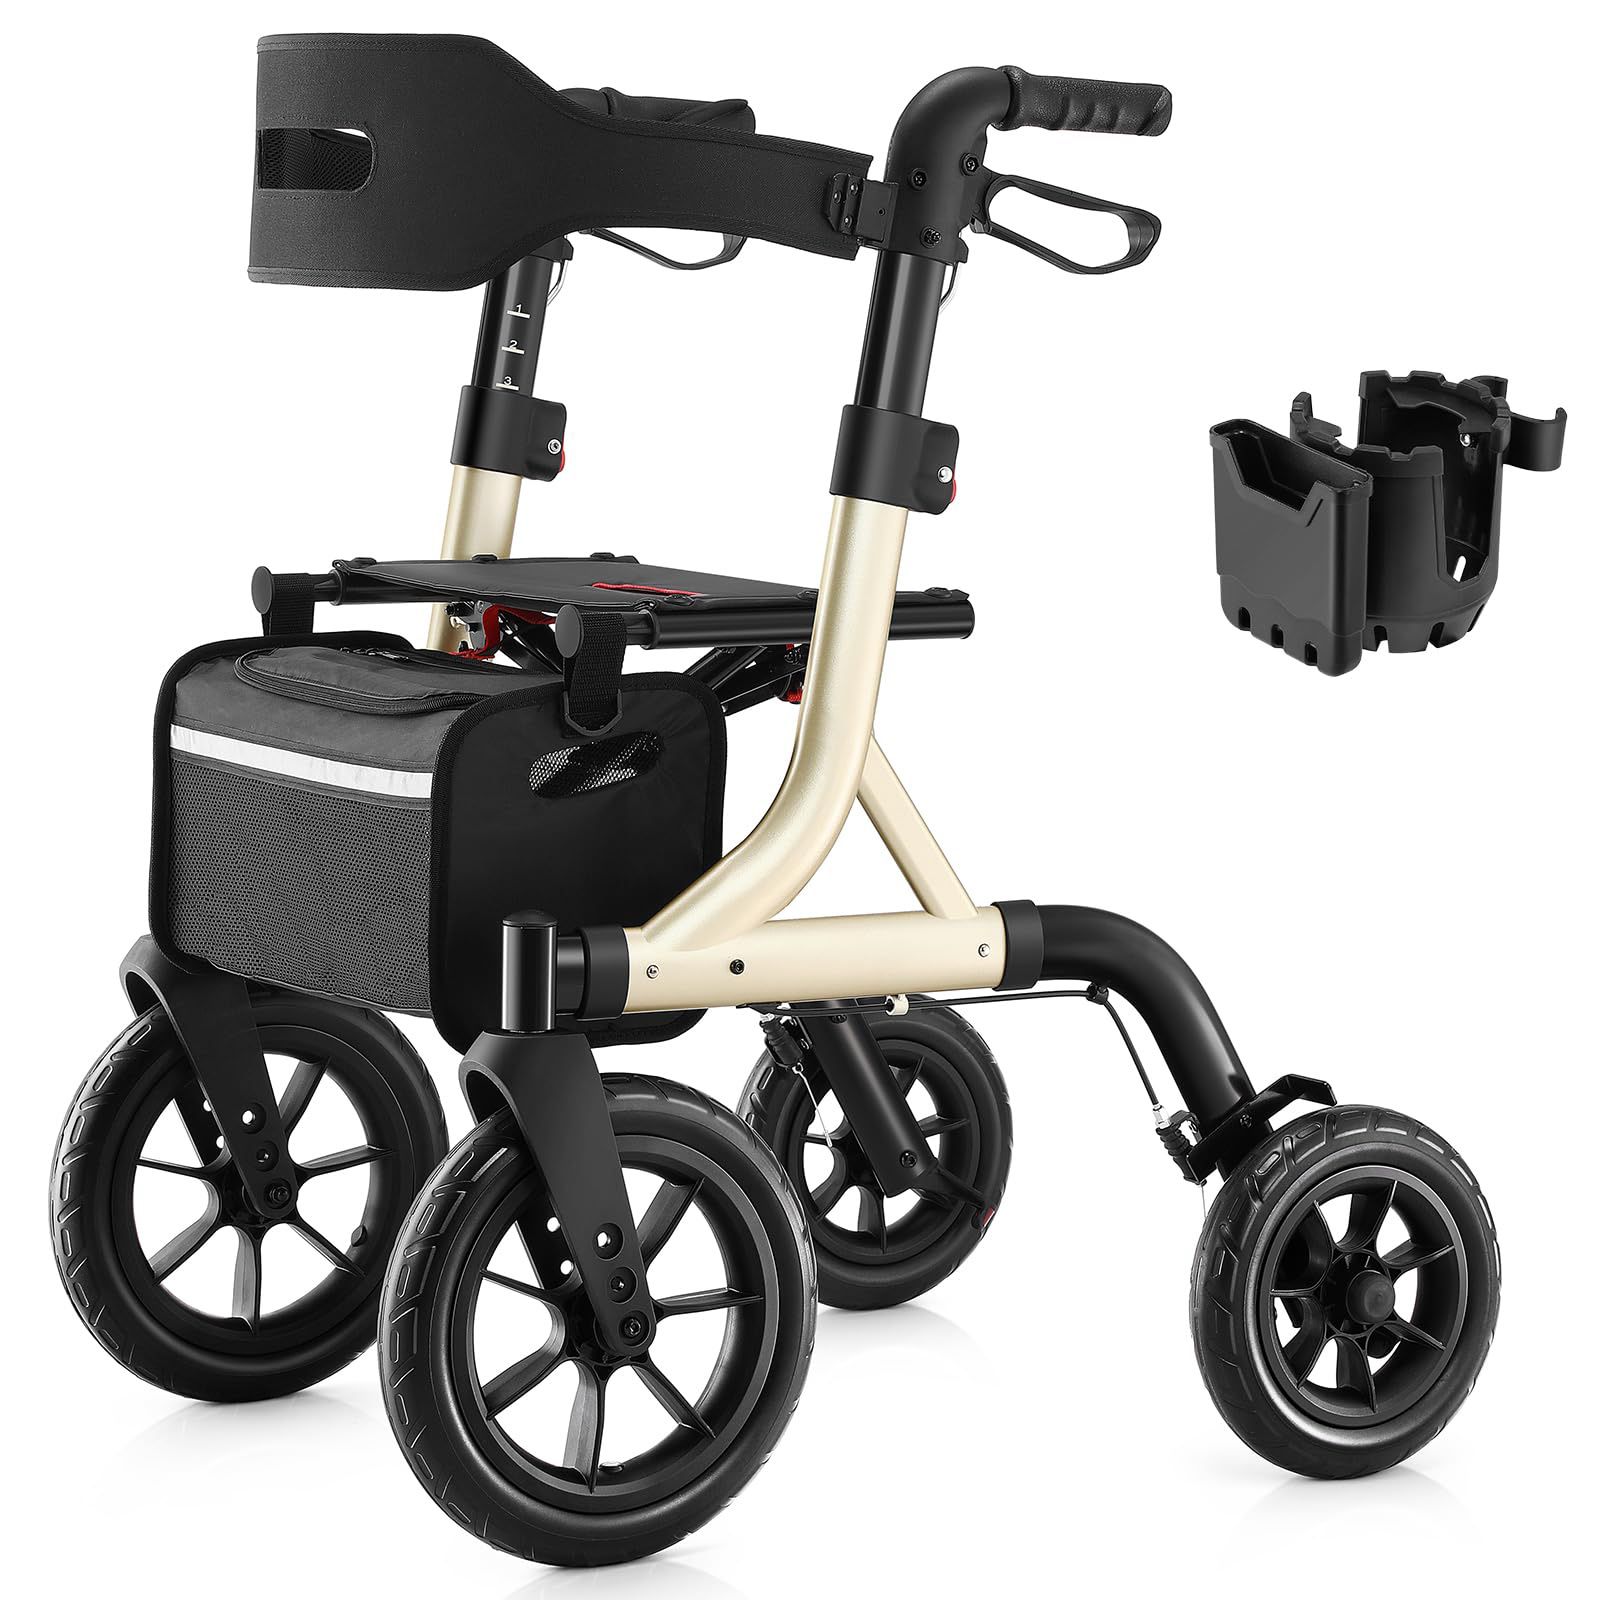 MAXWALK Walker for Seniors, Rollator Walker with Seat, 12" Big Rubber Wheels All Terrain Rollator Walker with Backrest, Built-in Cable, Cup Holder, Fo